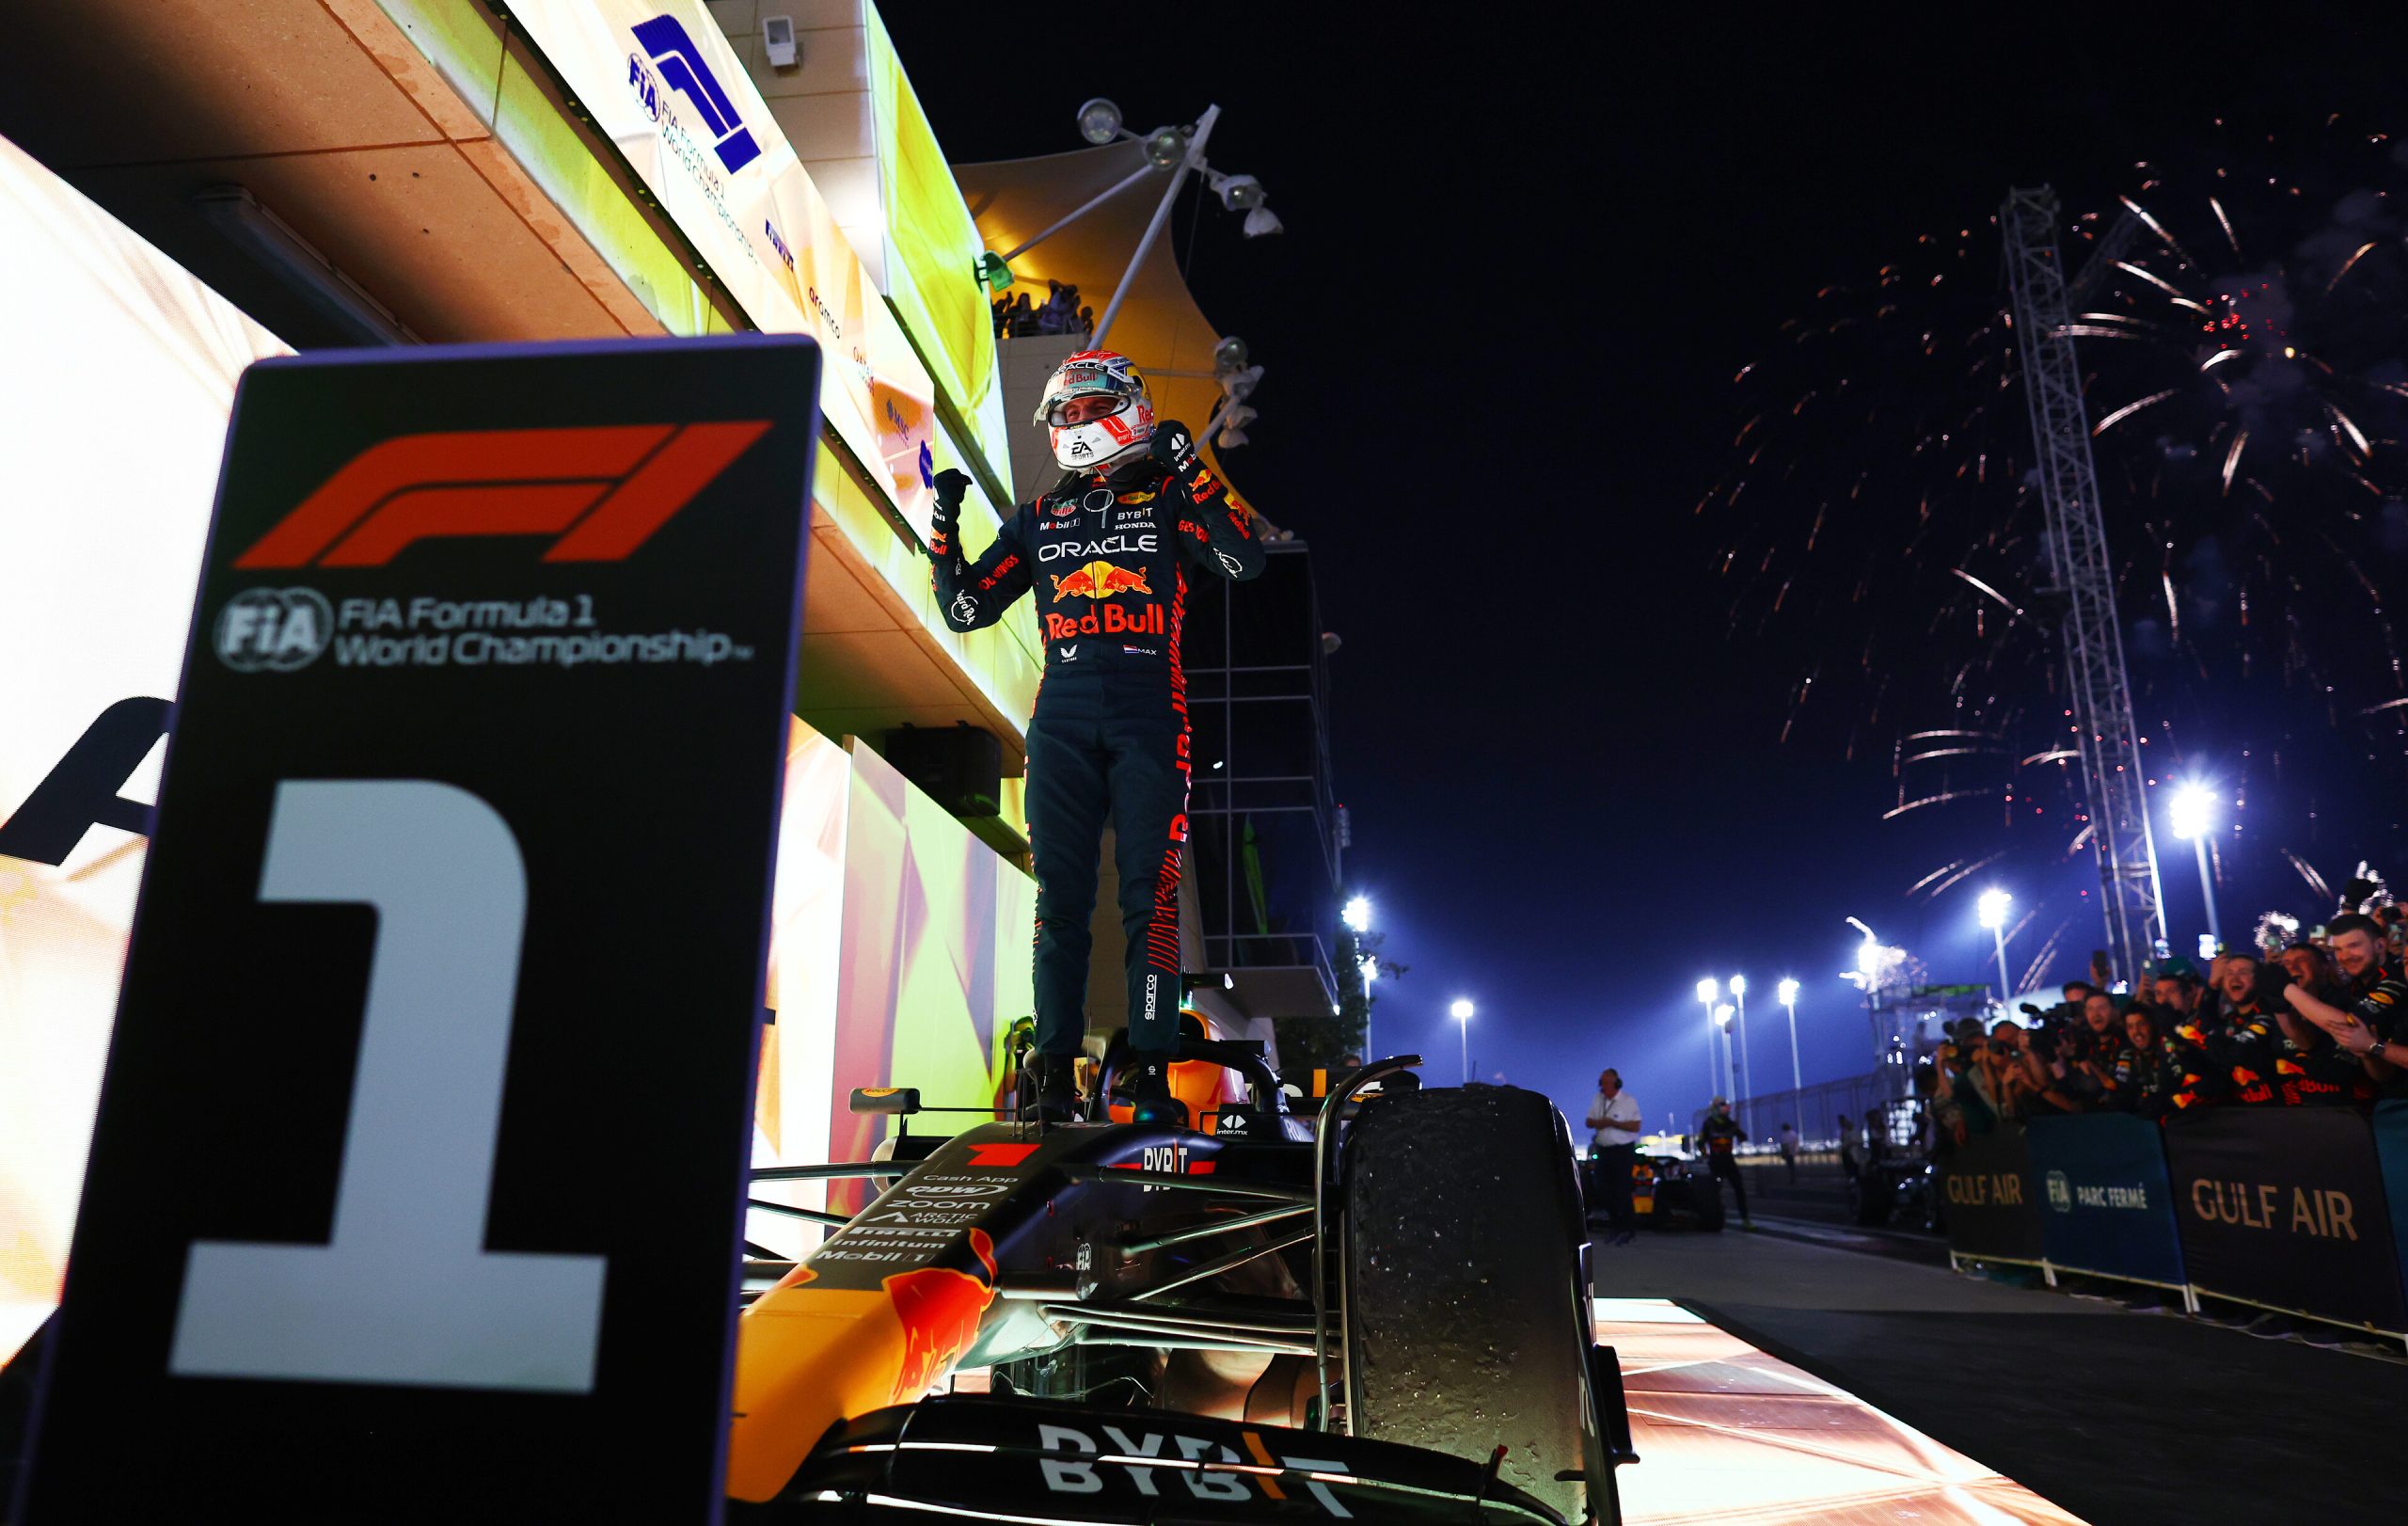 BAHRAIN, BAHRAIN - MARCH 05: Race winner Max Verstappen of the Netherlands and Oracle Red Bull Racing celebrates in parc ferme during the F1 Grand Prix of Bahrain at Bahrain International Circuit on March 05, 2023 in Bahrain, Bahrain. (Photo by Mark Thompson/Getty Images) // Getty Images / Red Bull Content Pool // SI202303050322 // Usage for editorial use only //